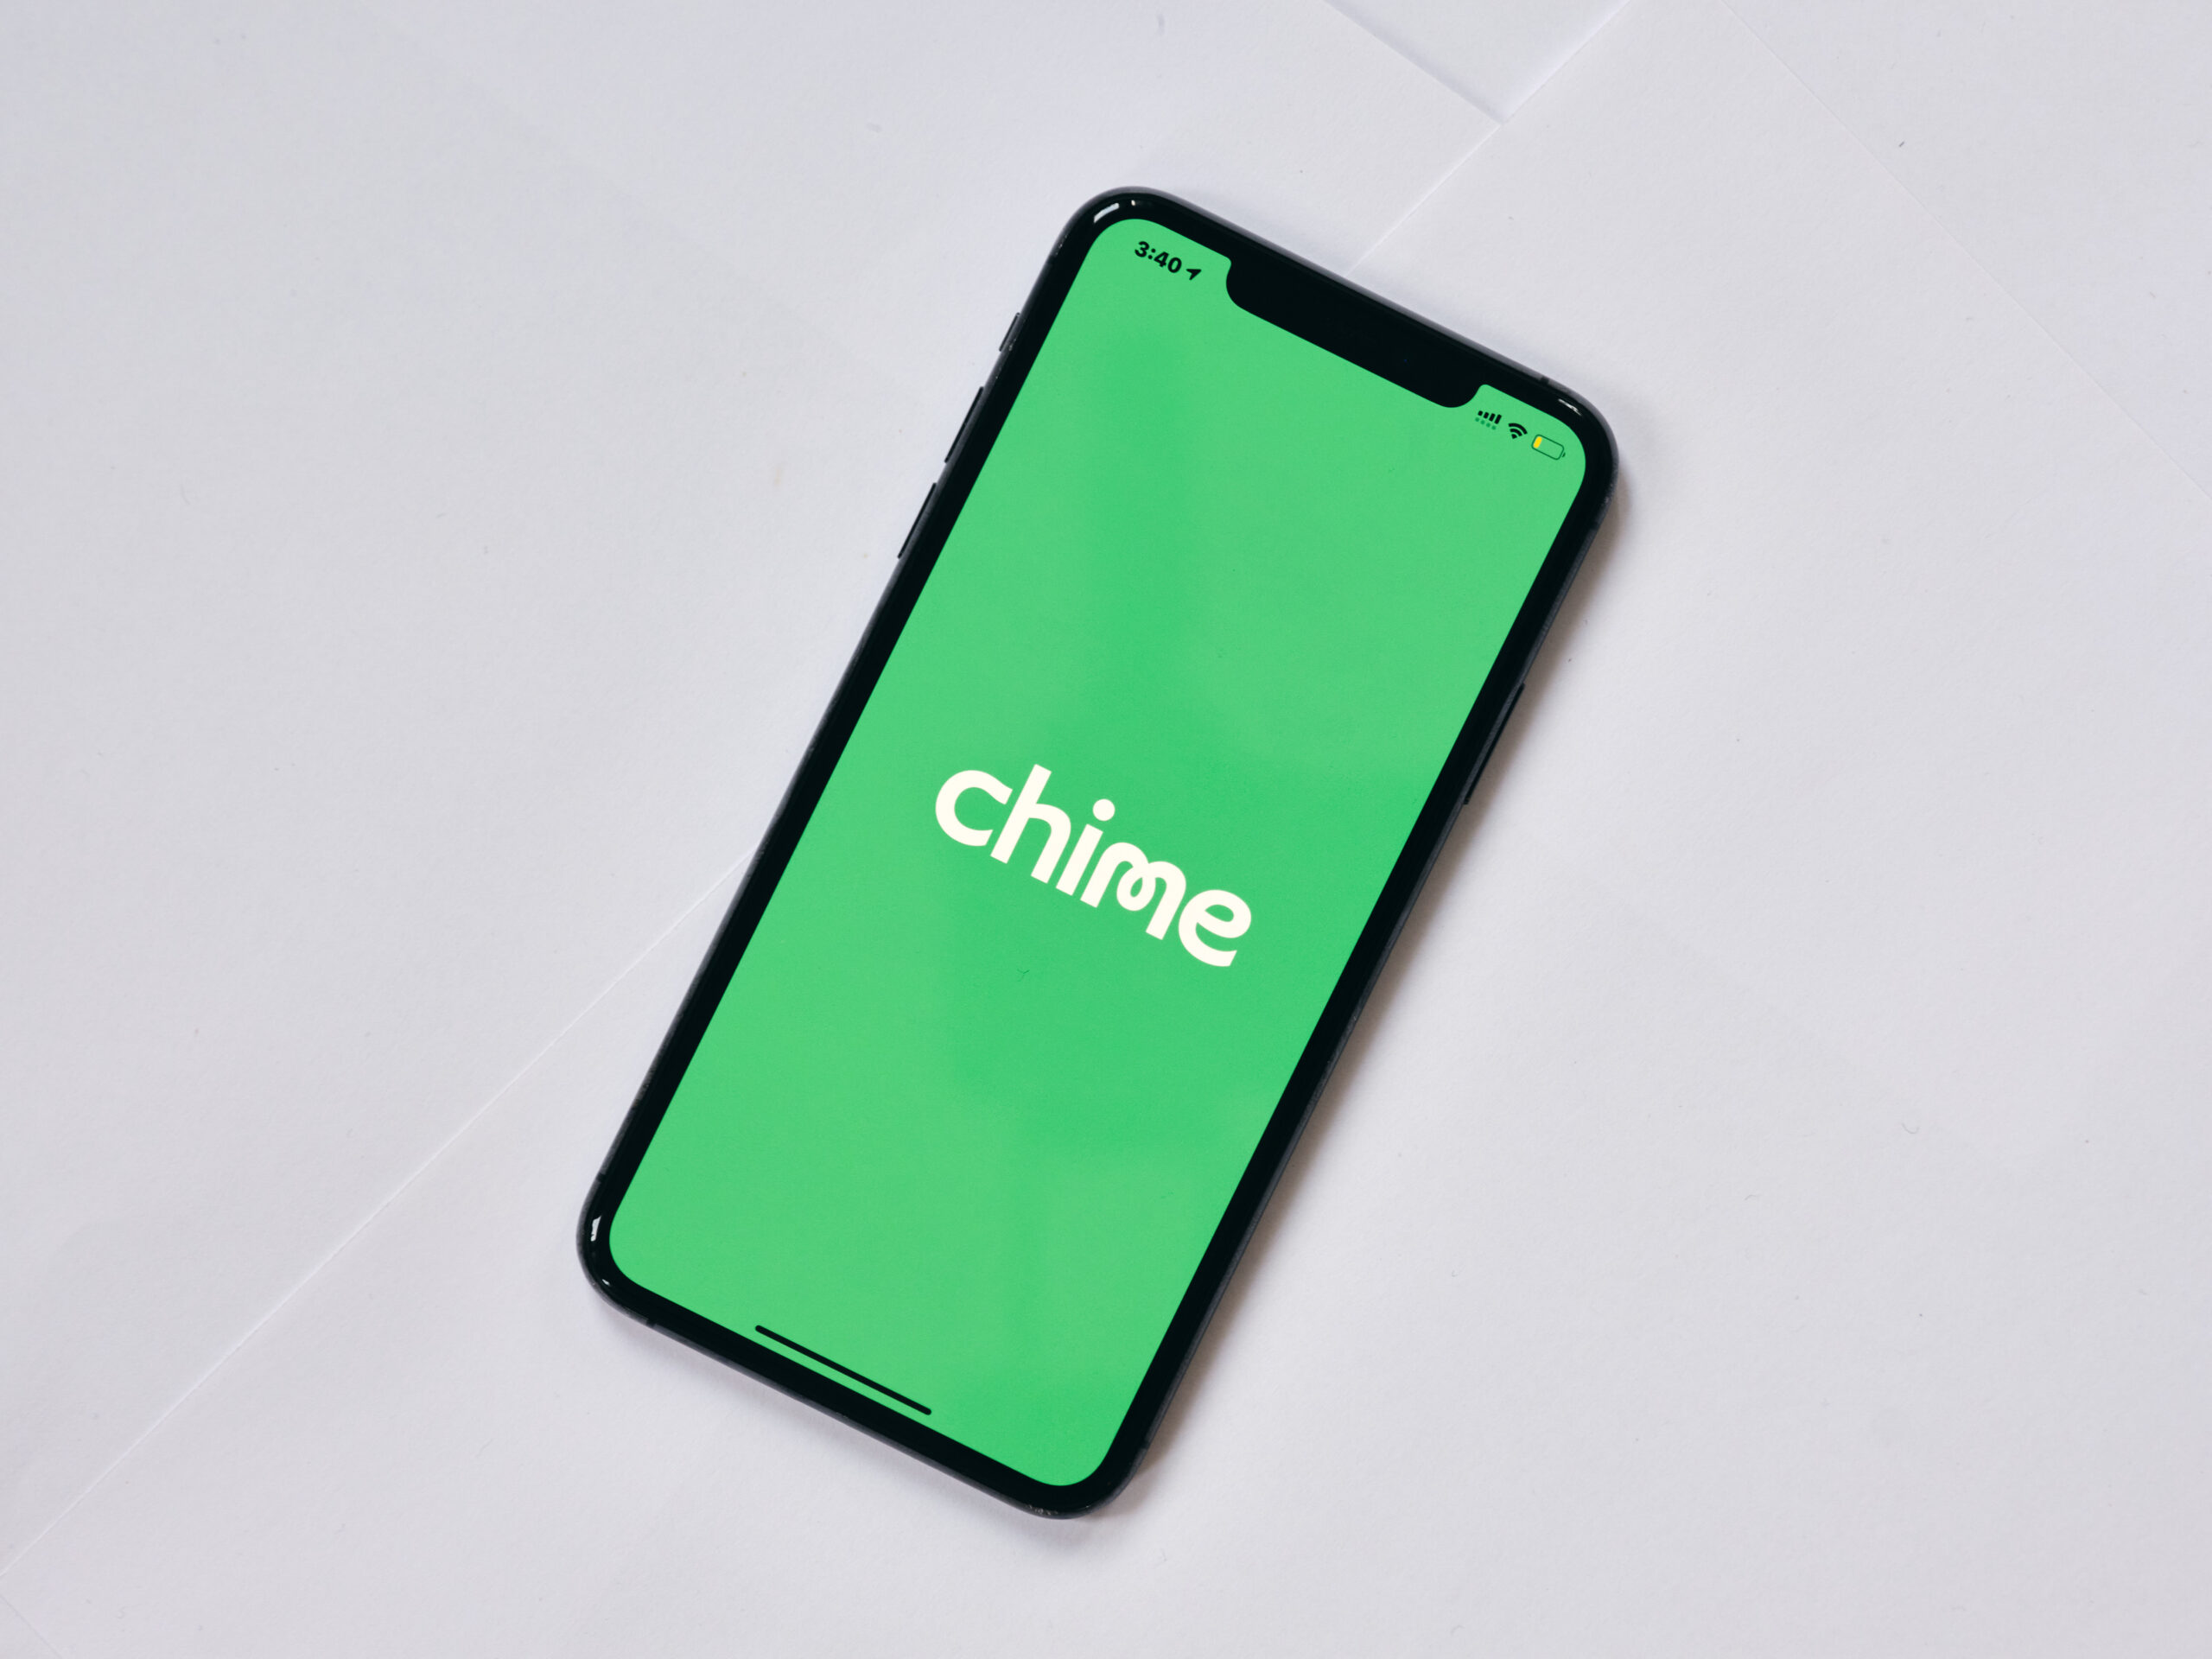 The Chime app.